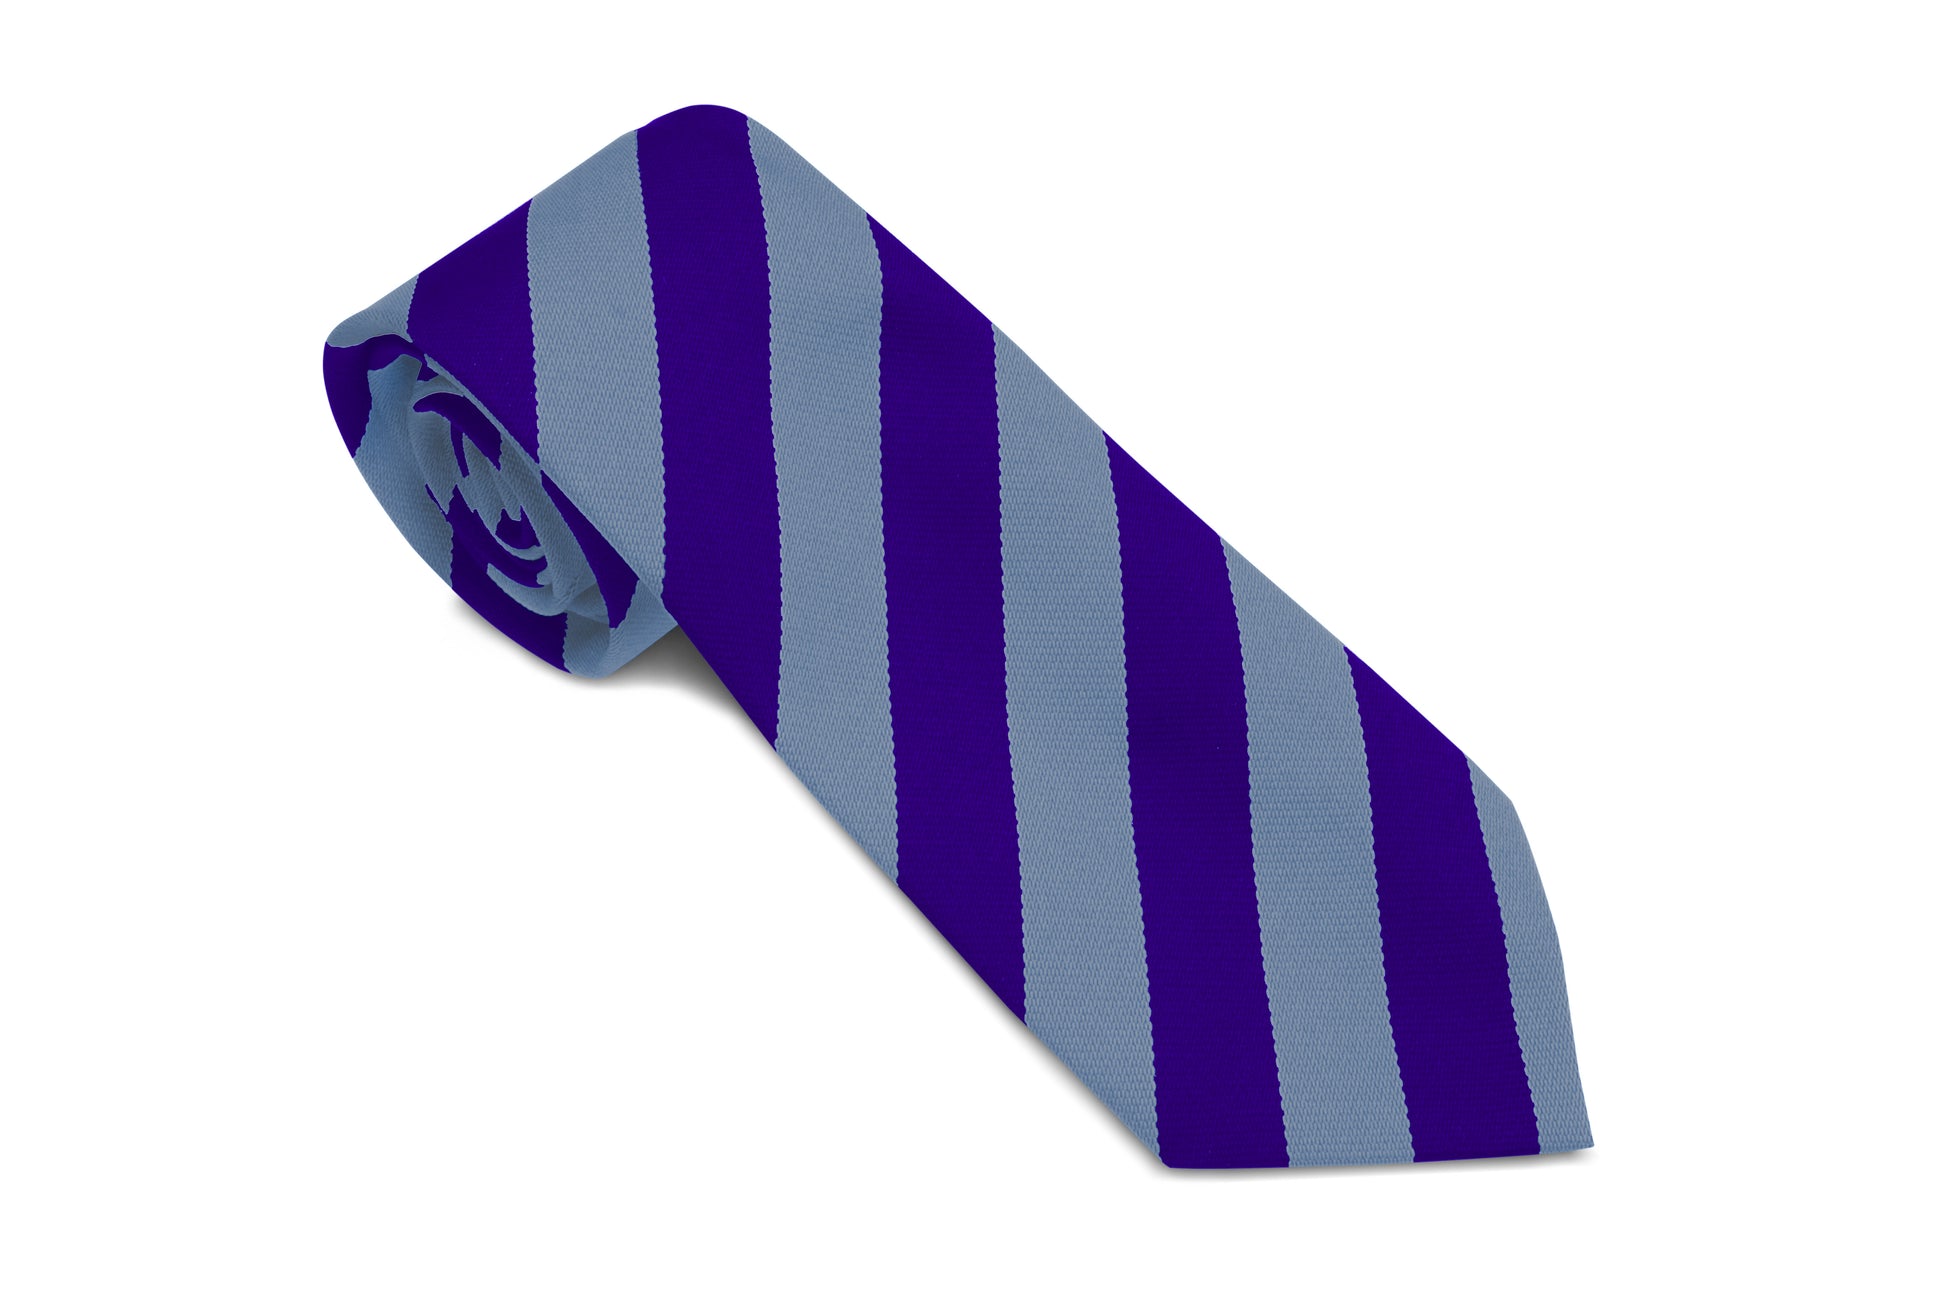 Stock Design Ties in Royal and Sky Equal Stripe (5404-9511) - Lynendo Trade Store